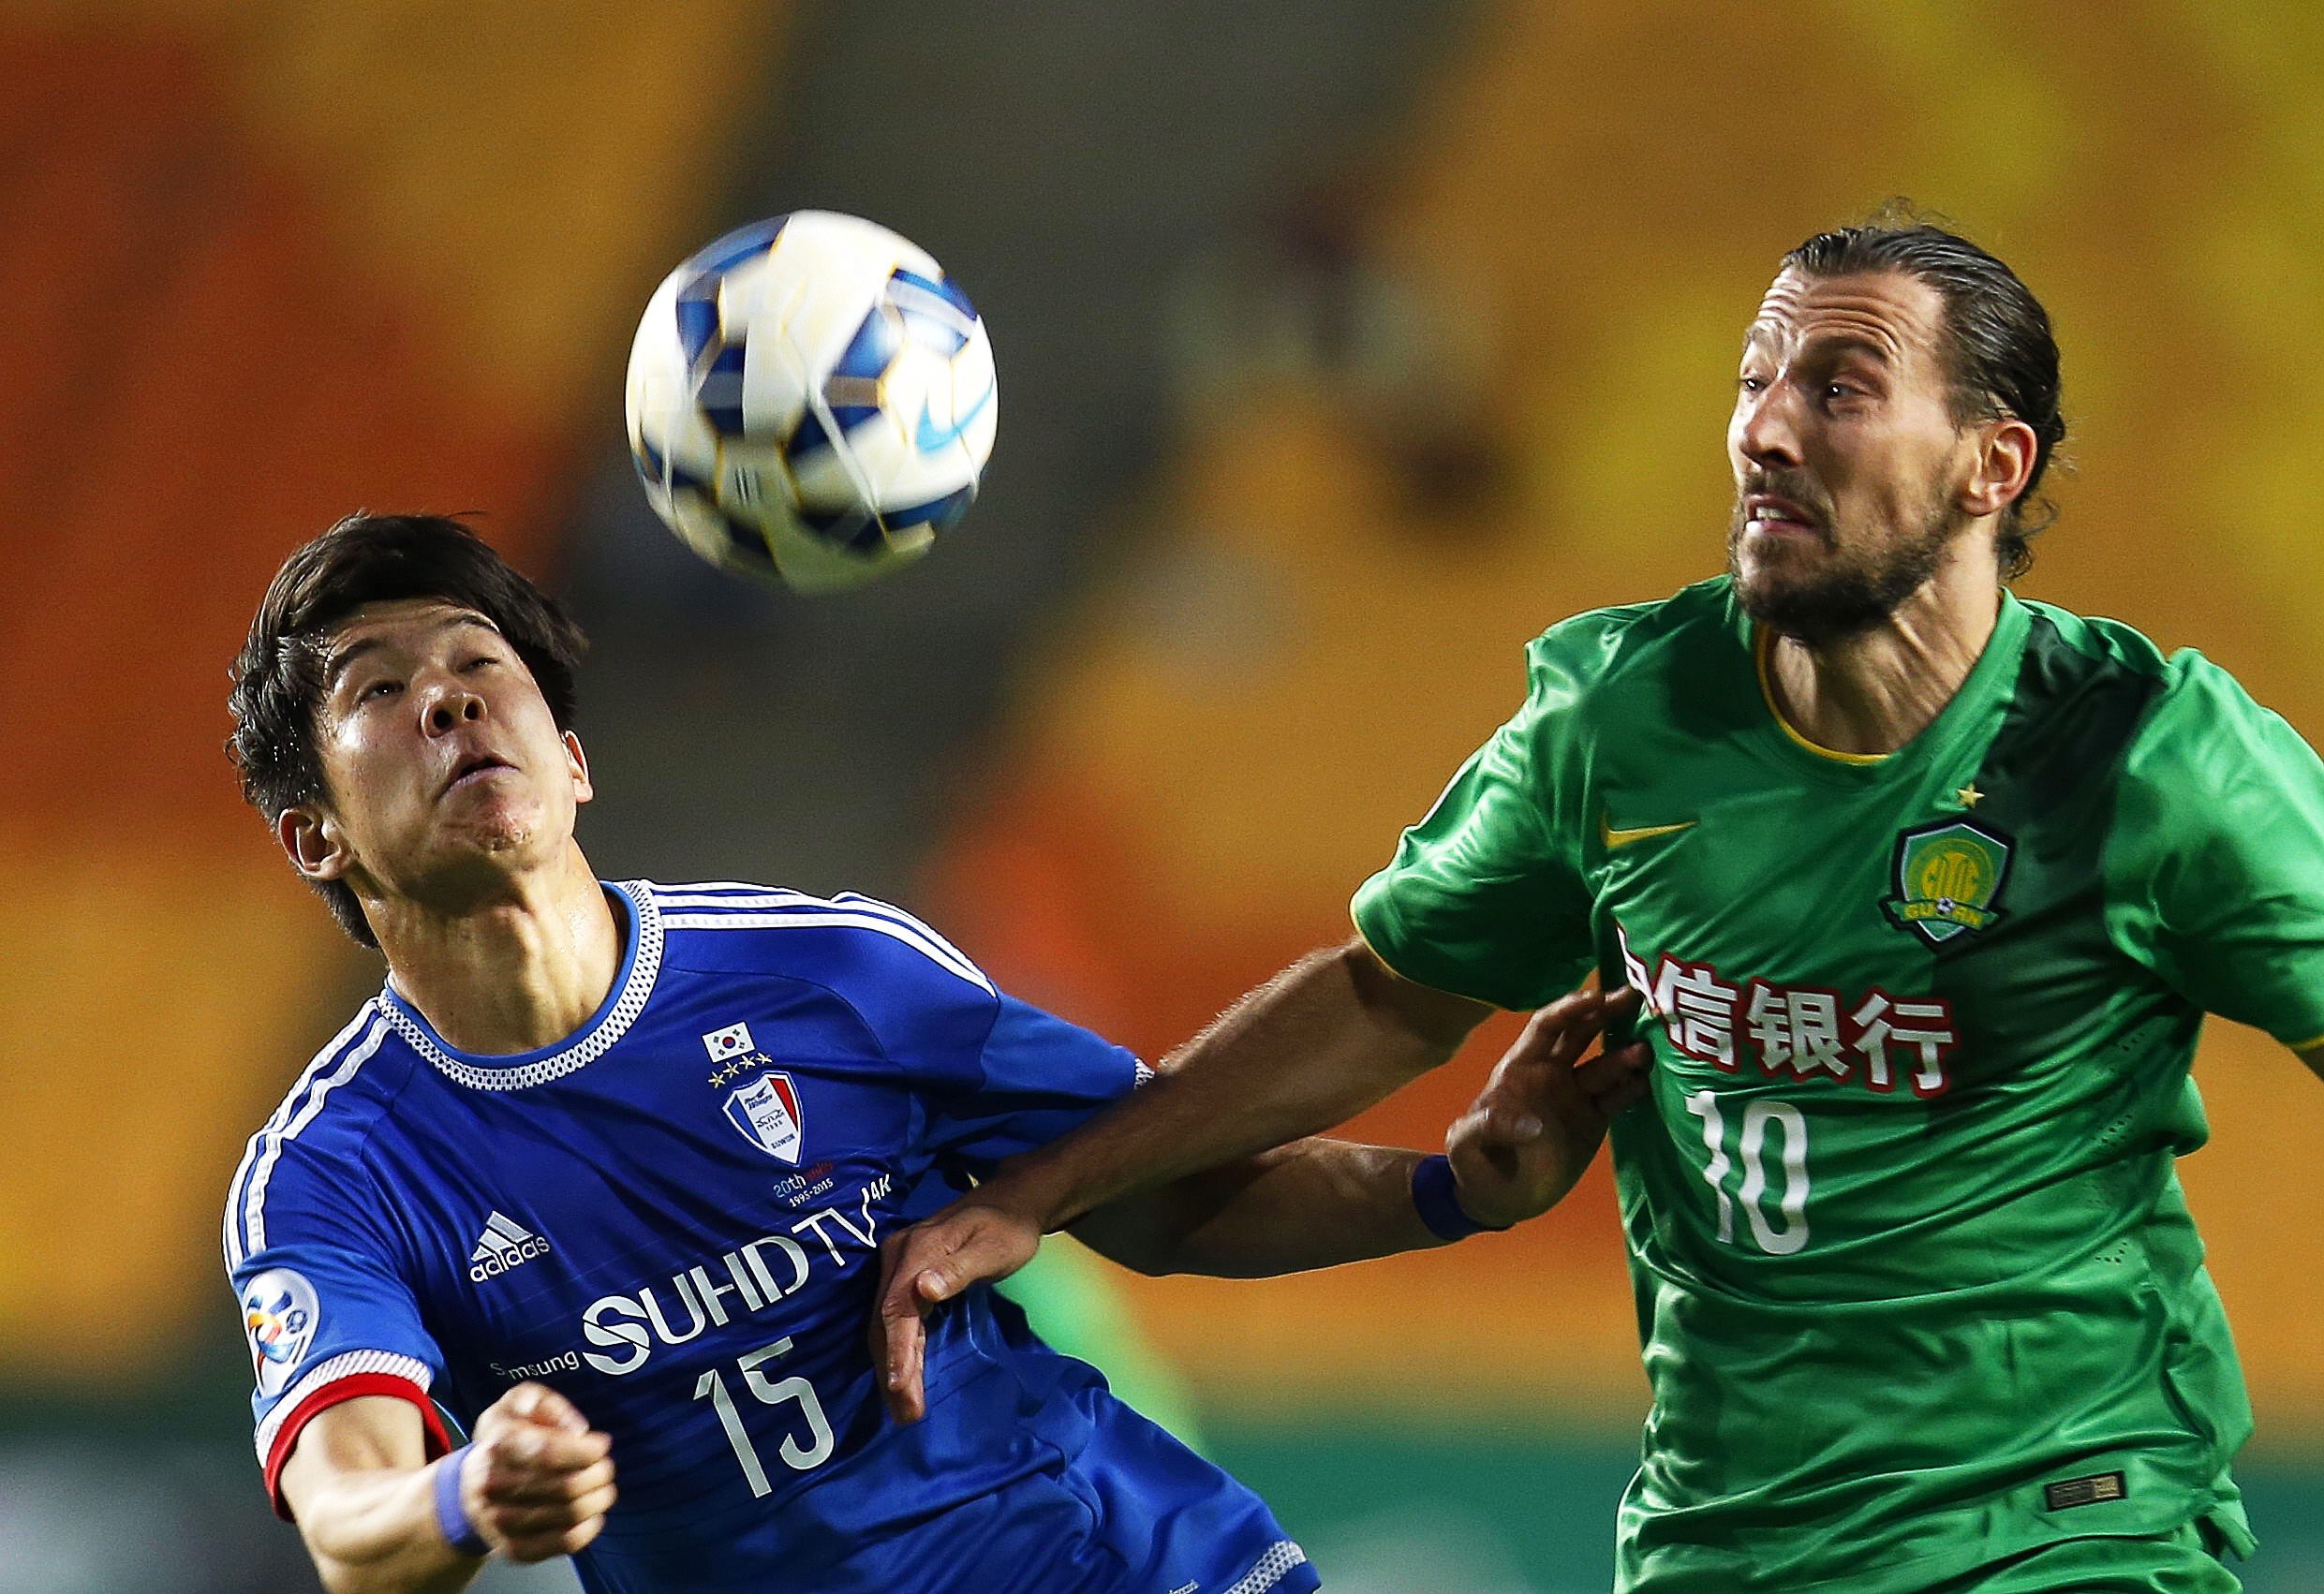 Beijing Guoan became the second Chinese team to make the knockout stage. Photo: EPA